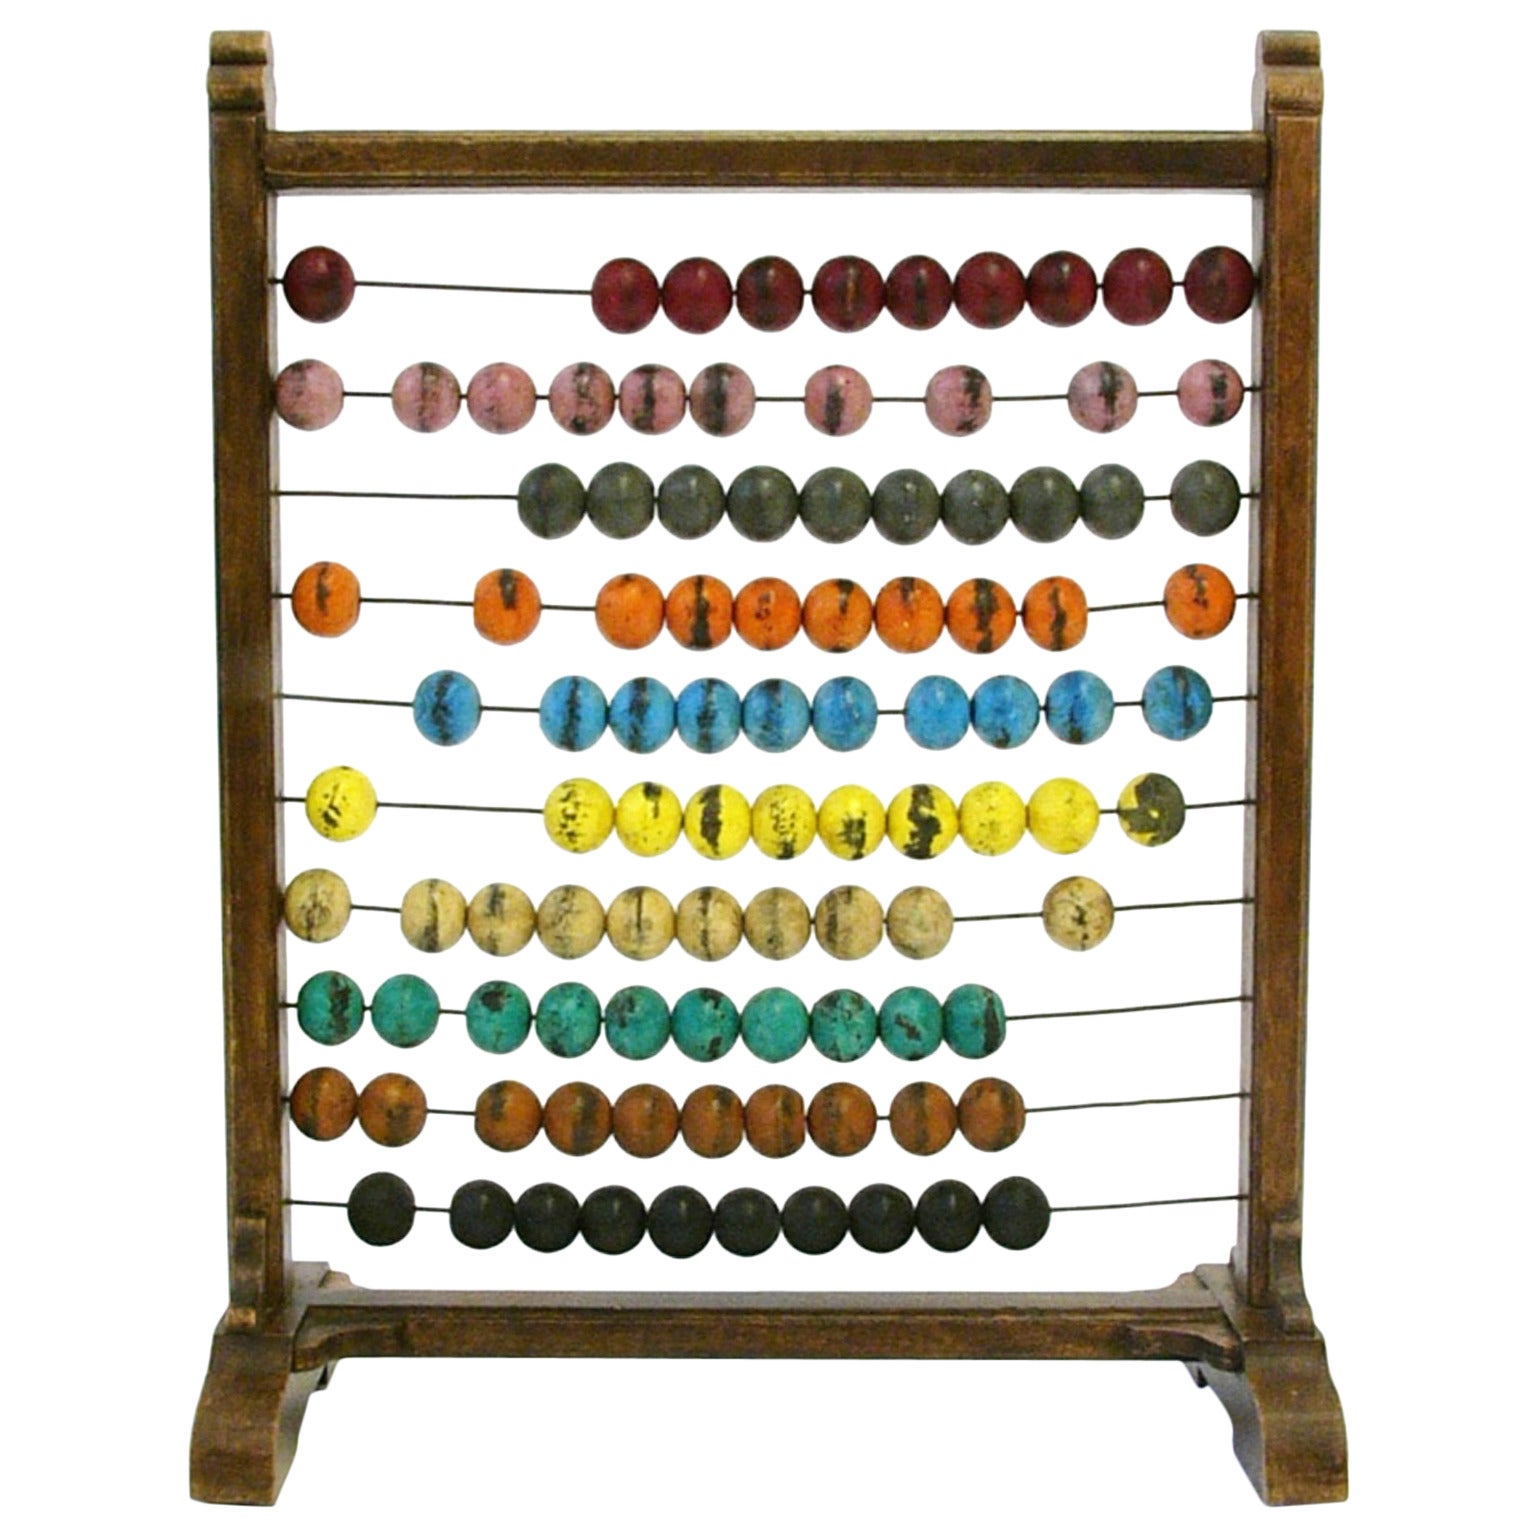 Early American Colorful Primitive Abacus